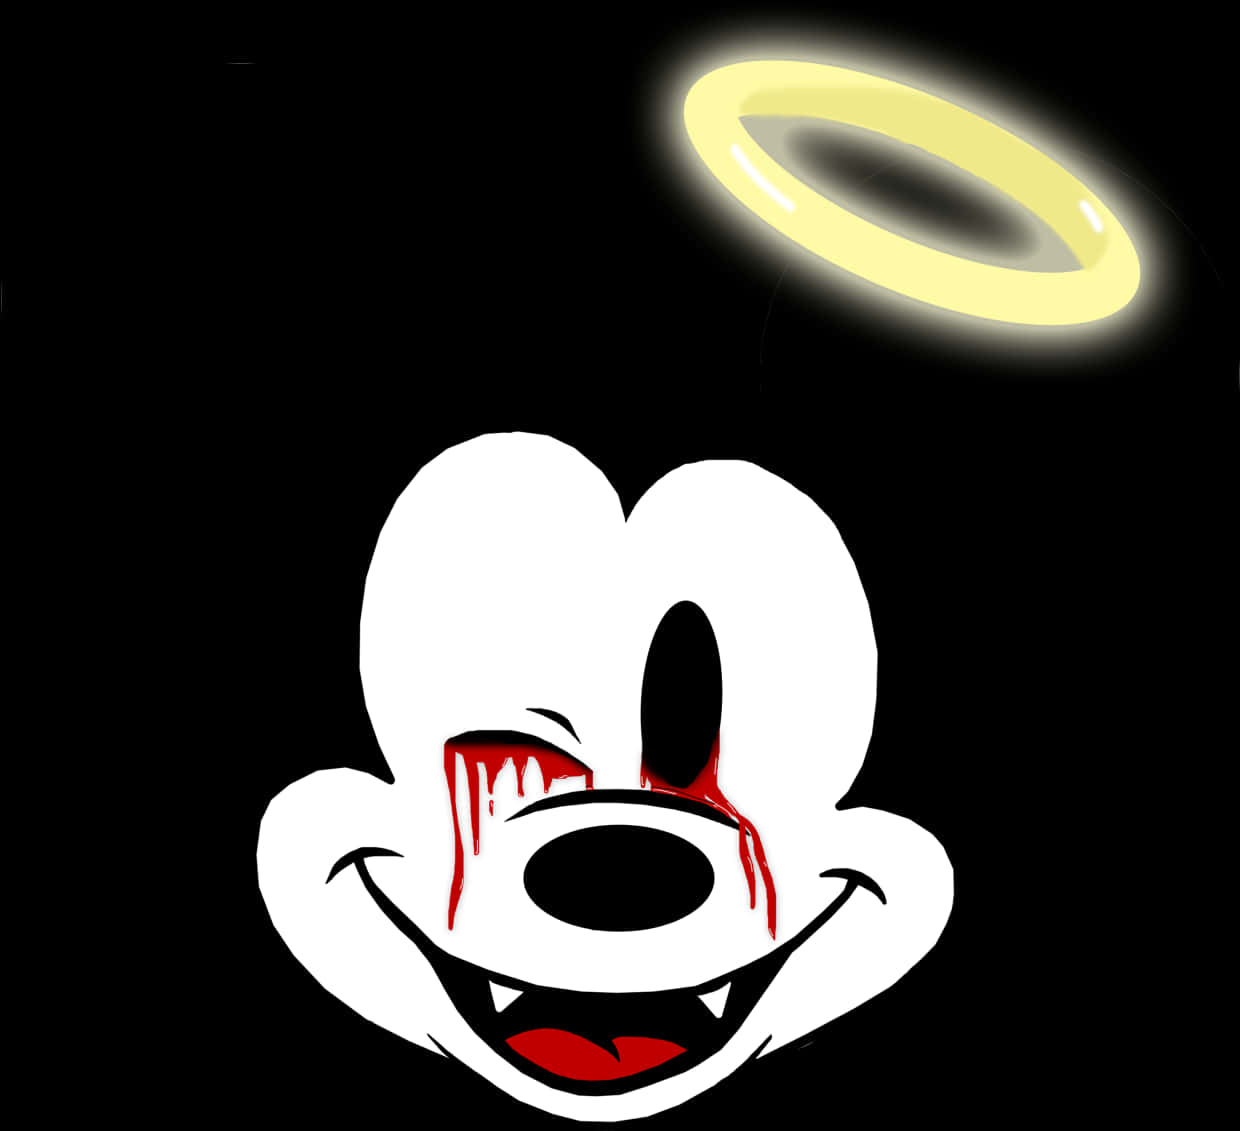 A Cartoon Character With A Halo Above It